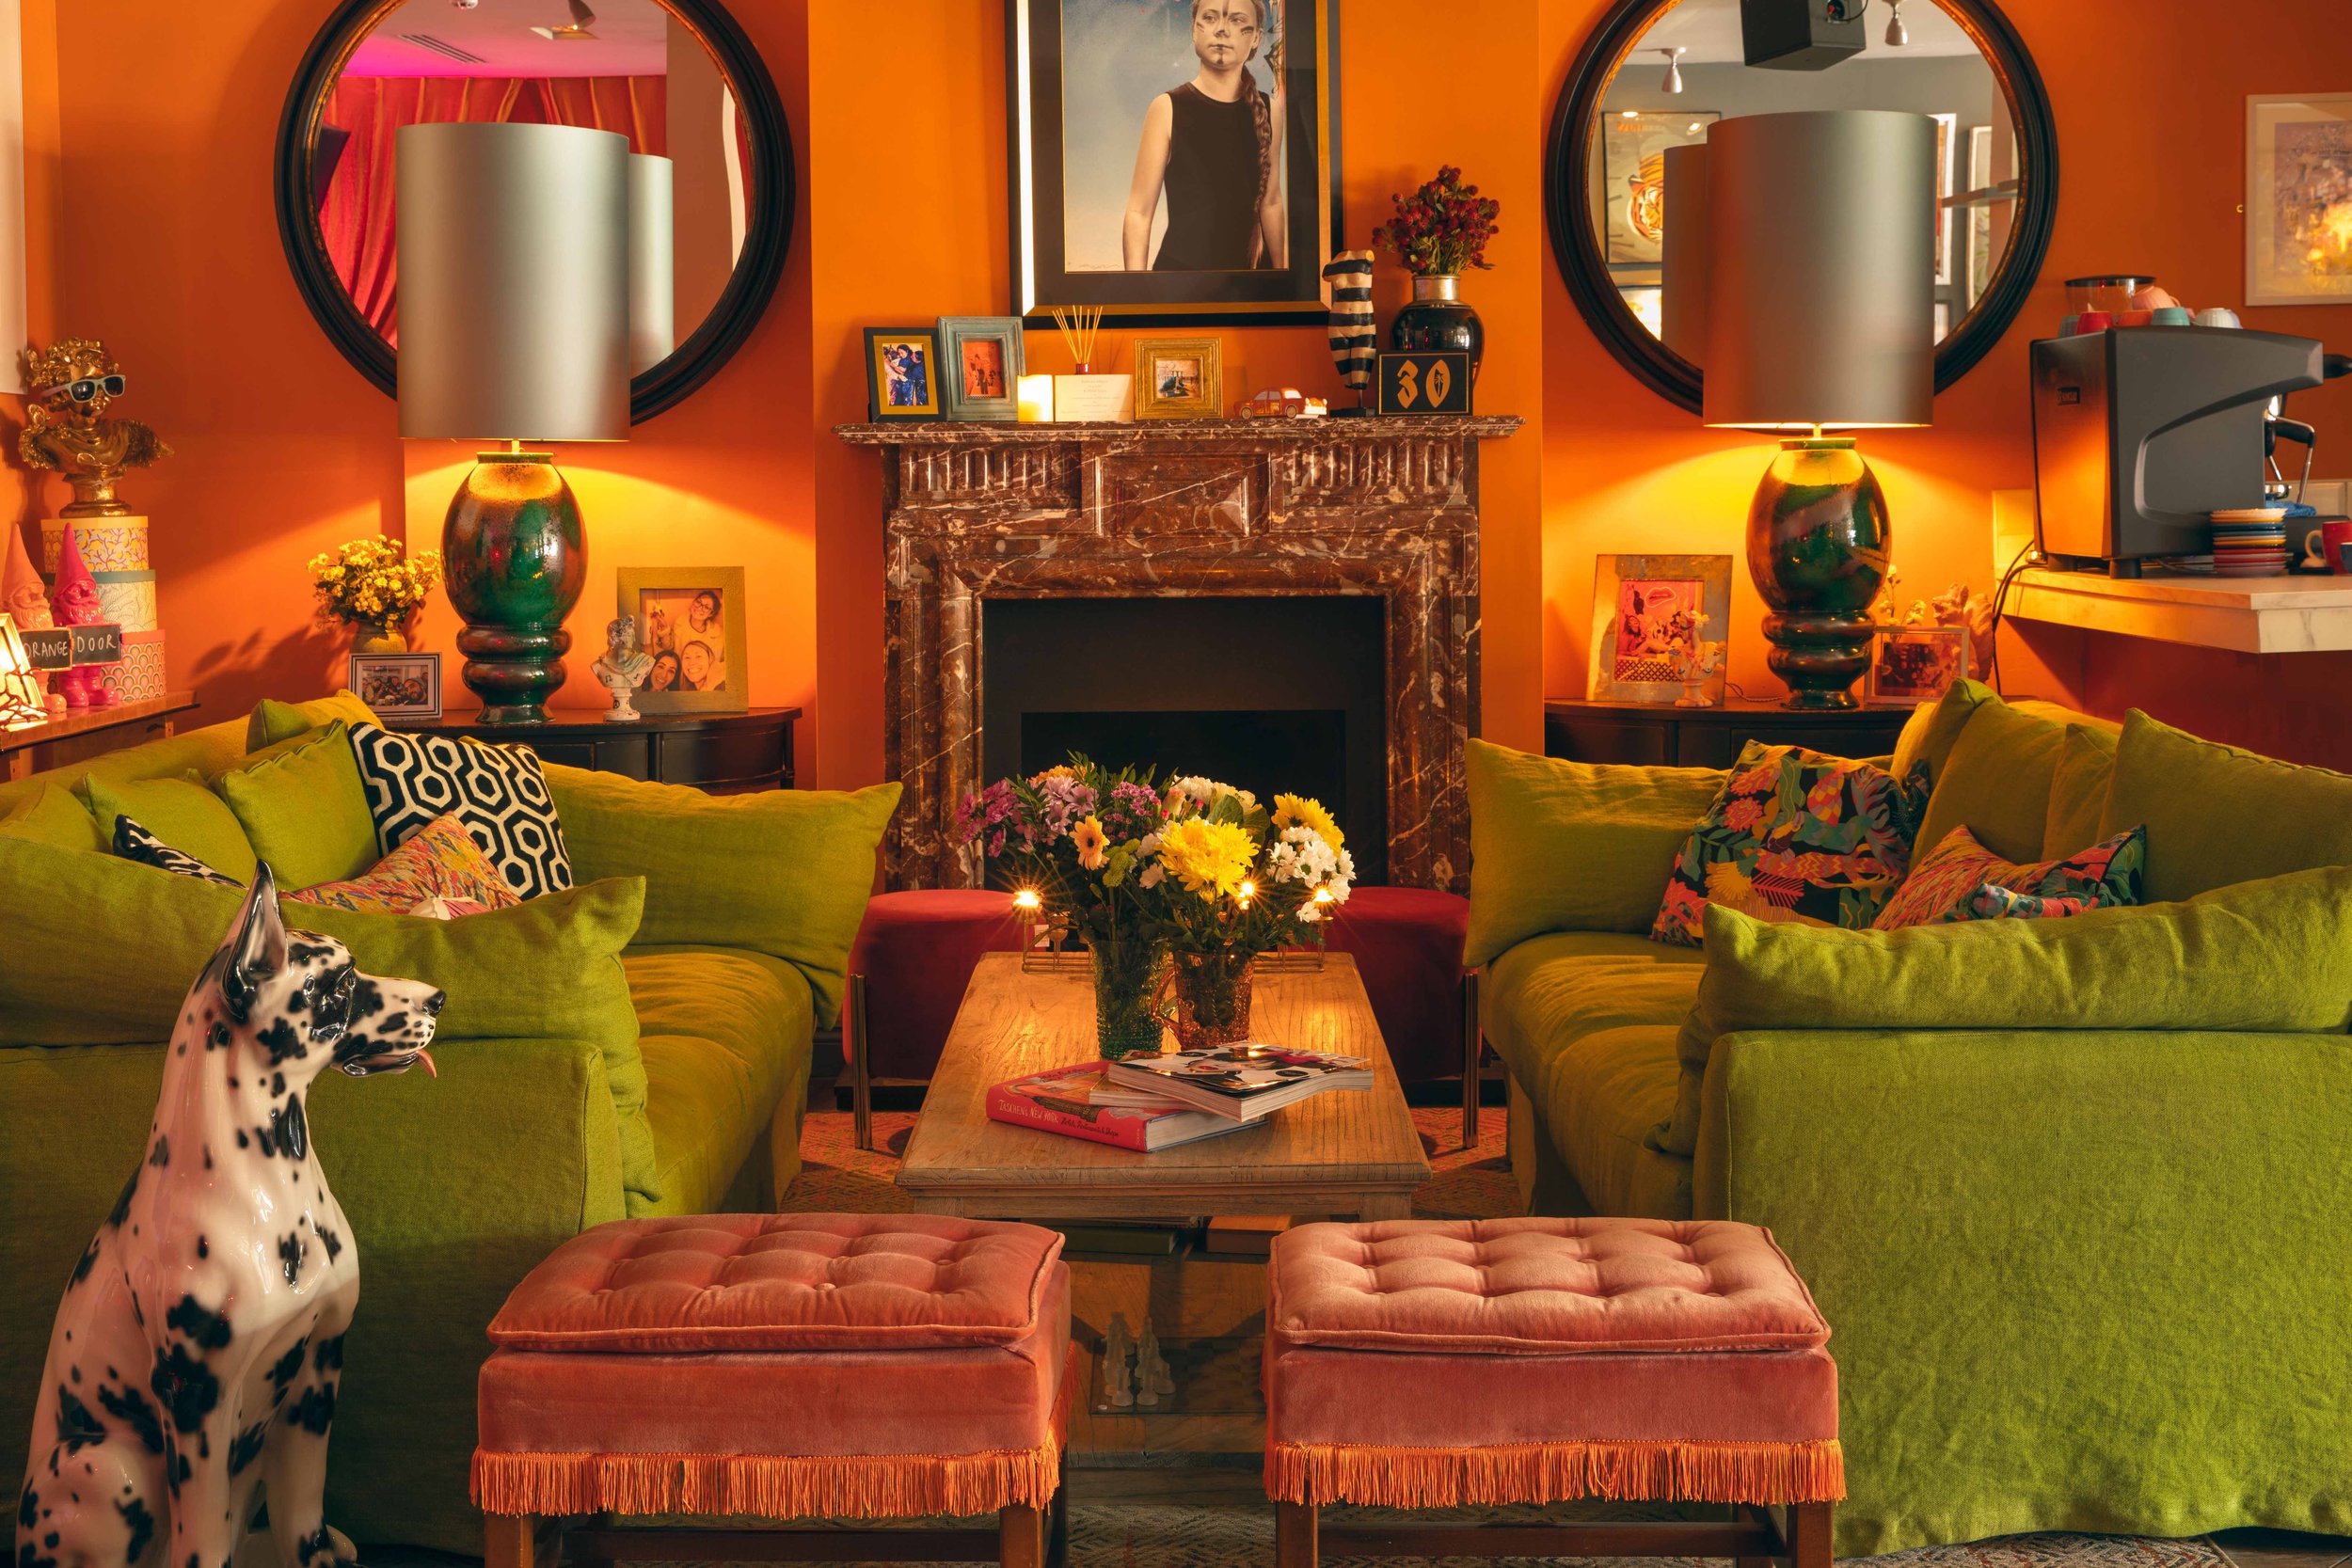 An ornate living room with orange walls, chartreuse couches, and square pink ottomans, plus small tables covered in flowers and picture frames.